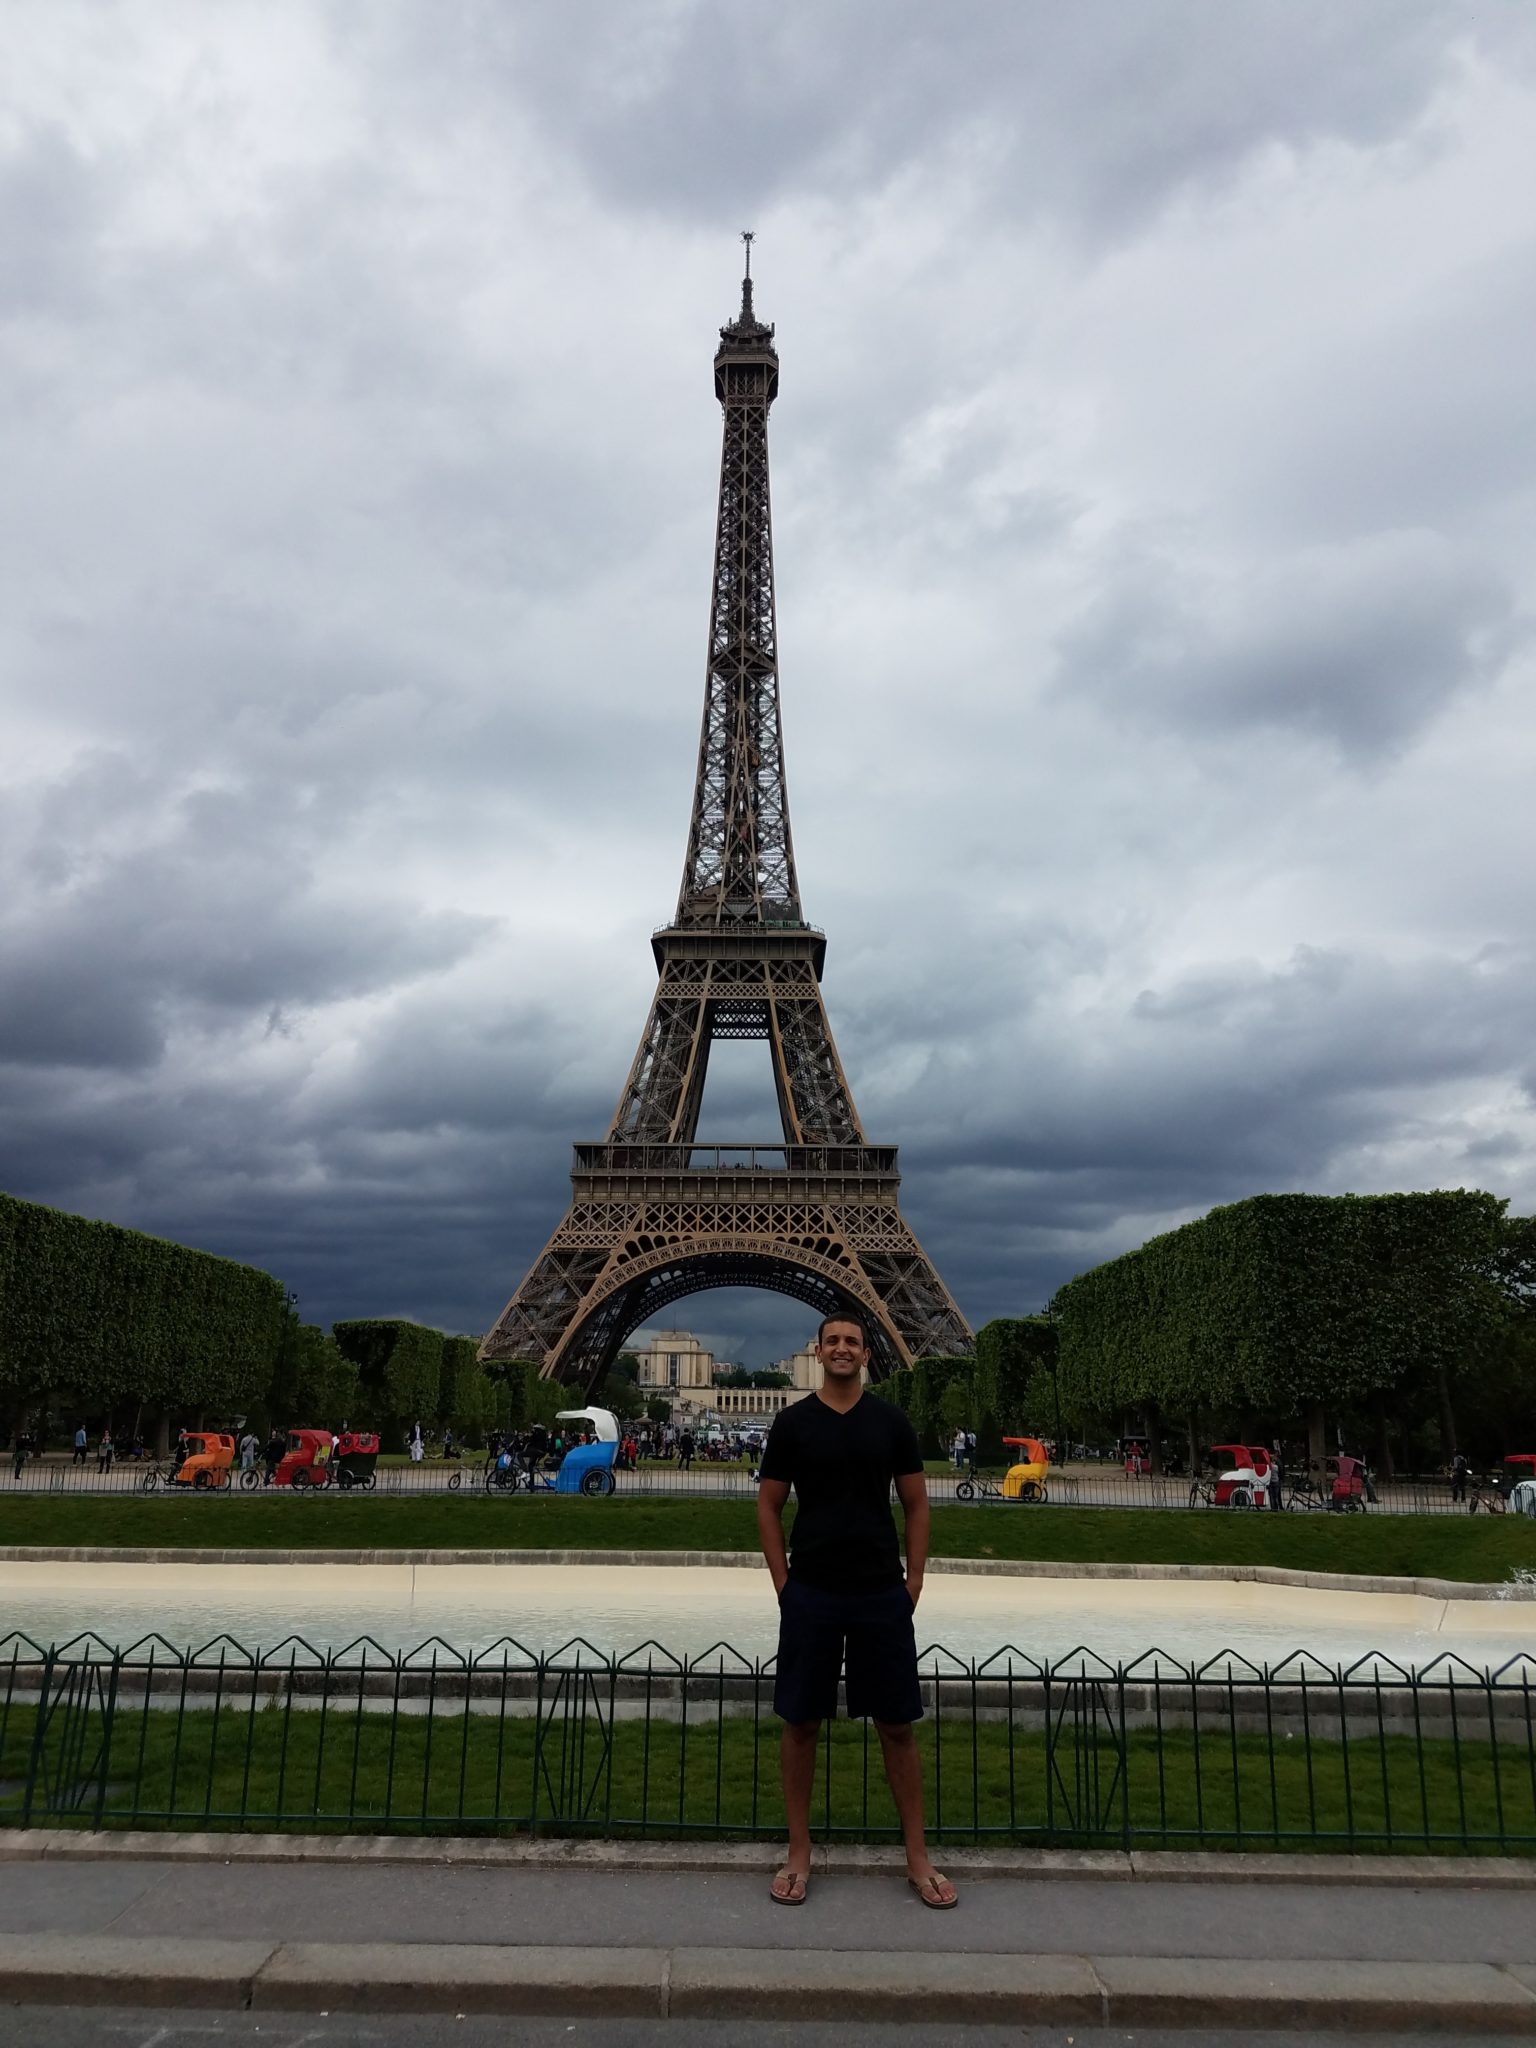 a man standing in front of a tall tower with Eiffel Tower in the background